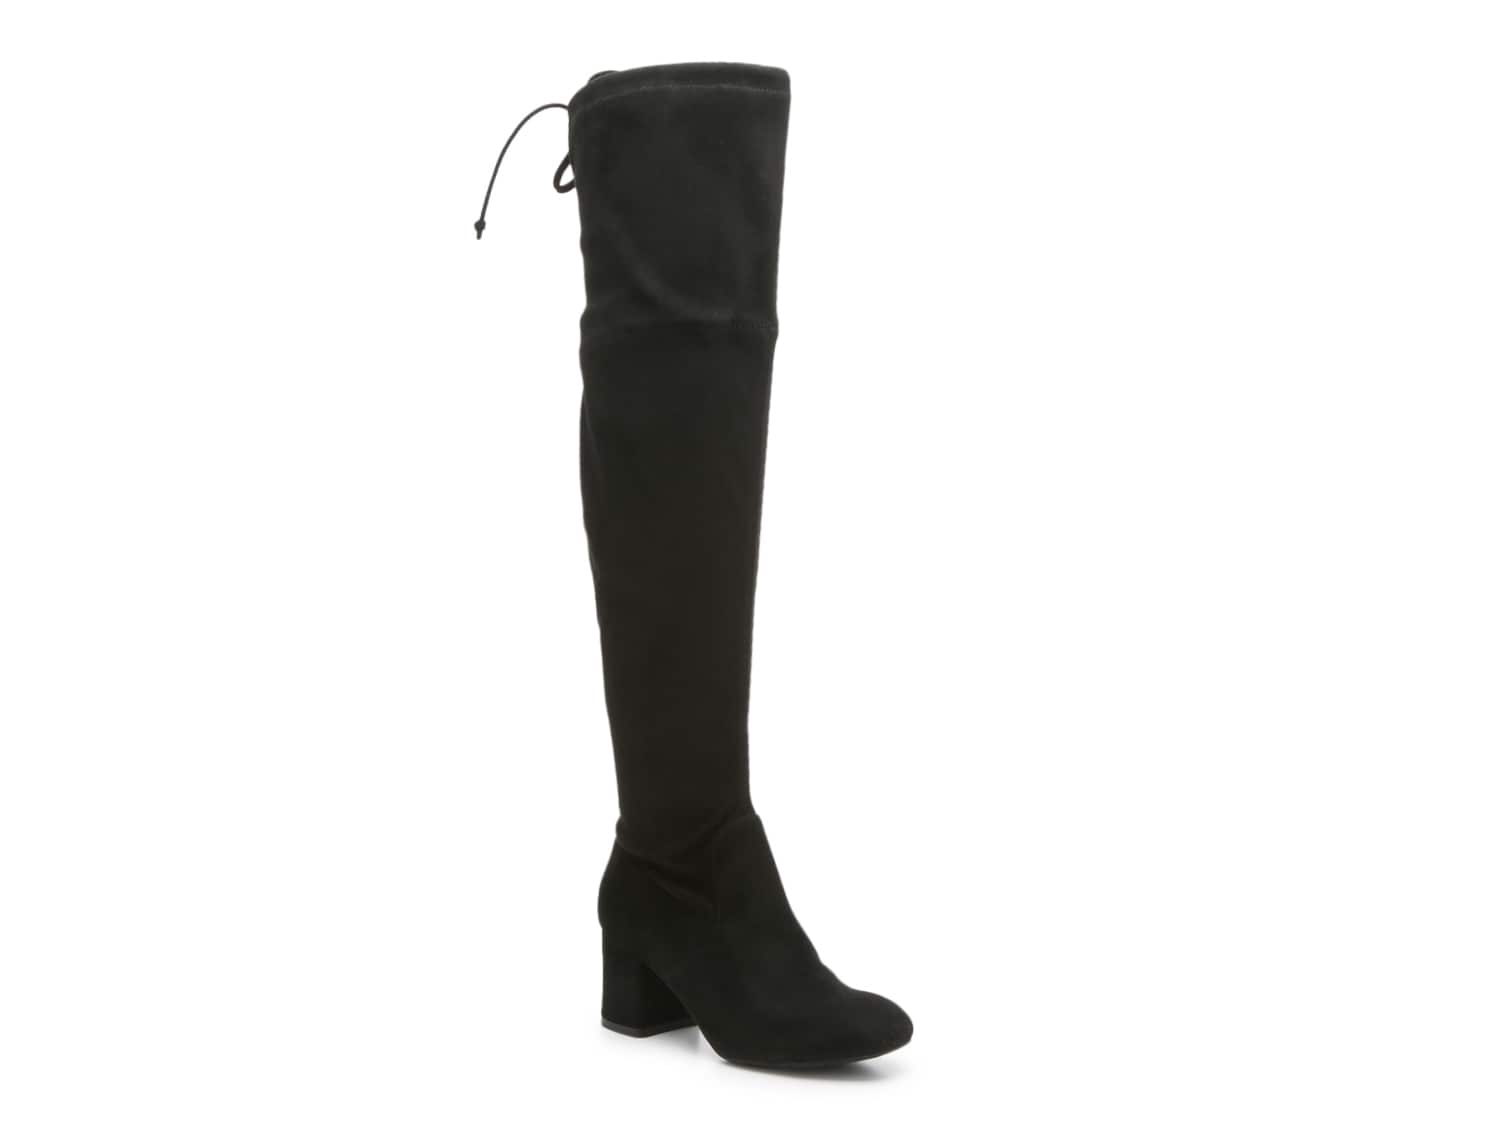 Kelly & Katie Tarq Over-the-Knee Boot - Free Shipping | DSW